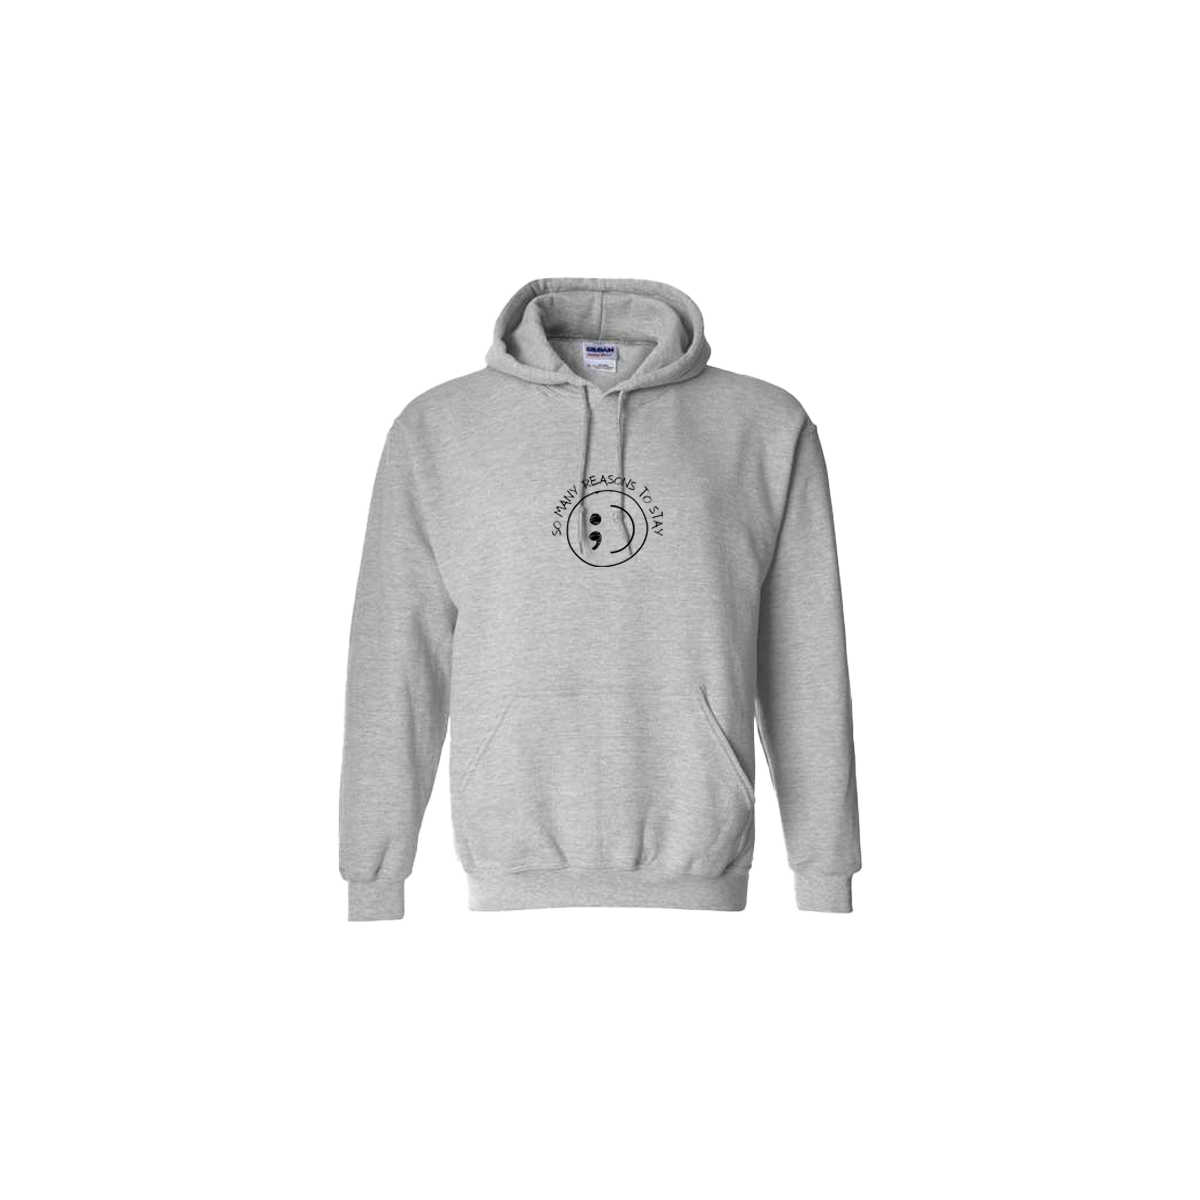 So Many Reasons to Stay Embroidered Grey Hoodie - Mental Health Awareness Clothing